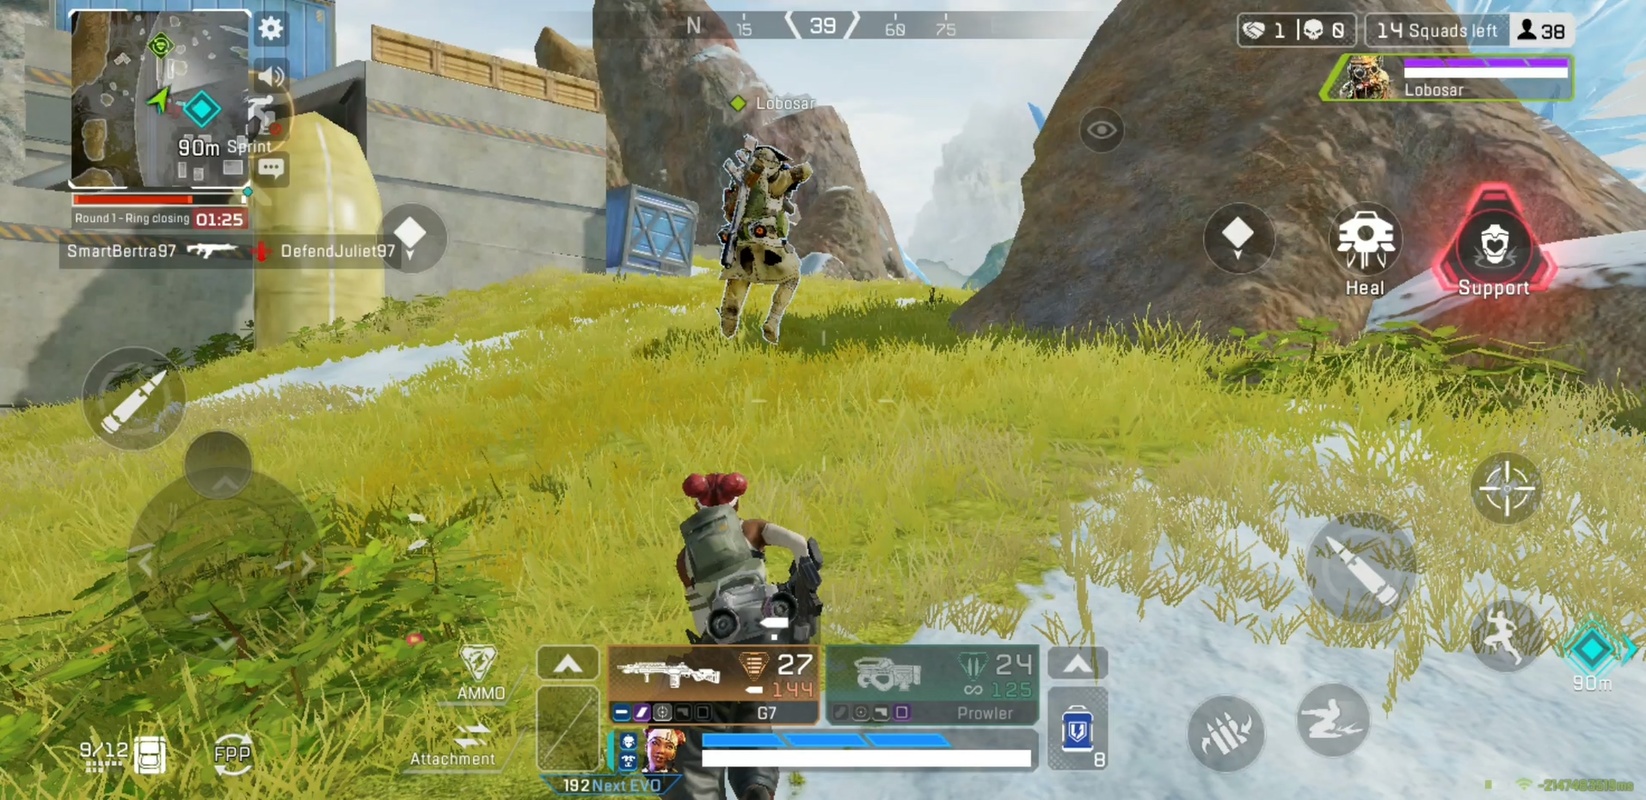 Apex Legends Mobile's Second Season is Getting a New Legend